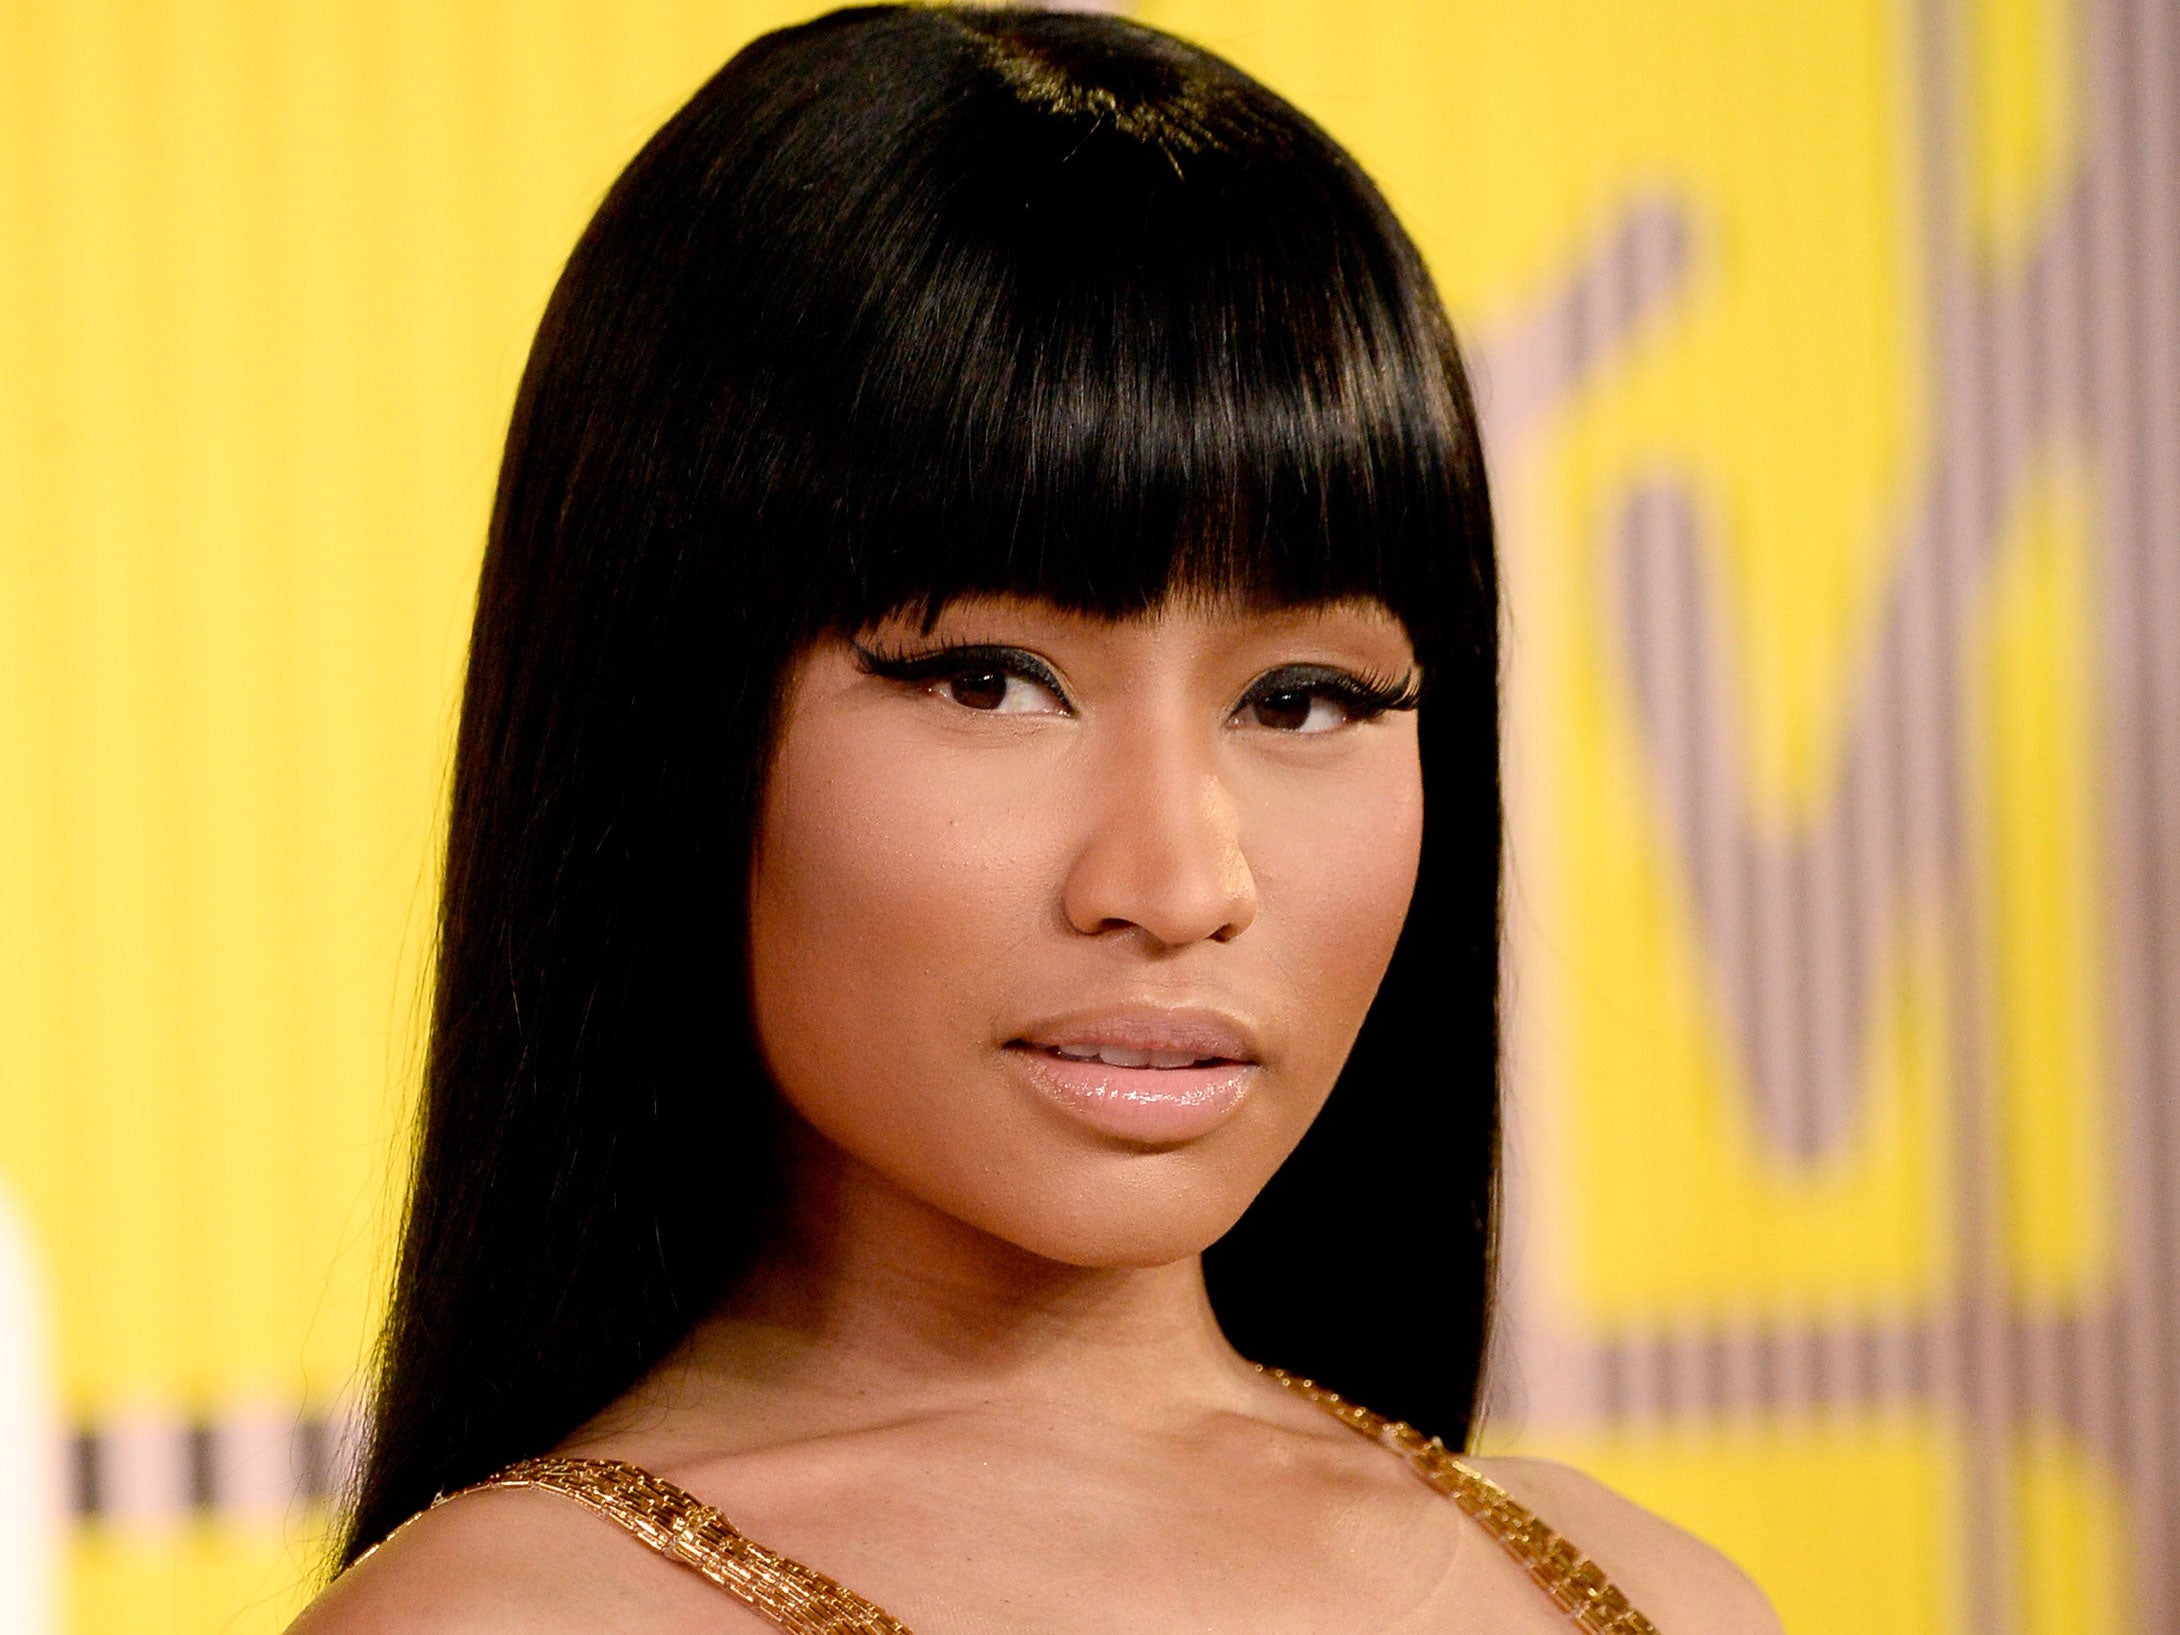 Minaj defended herself by saying the person in the wheelchair was a friend